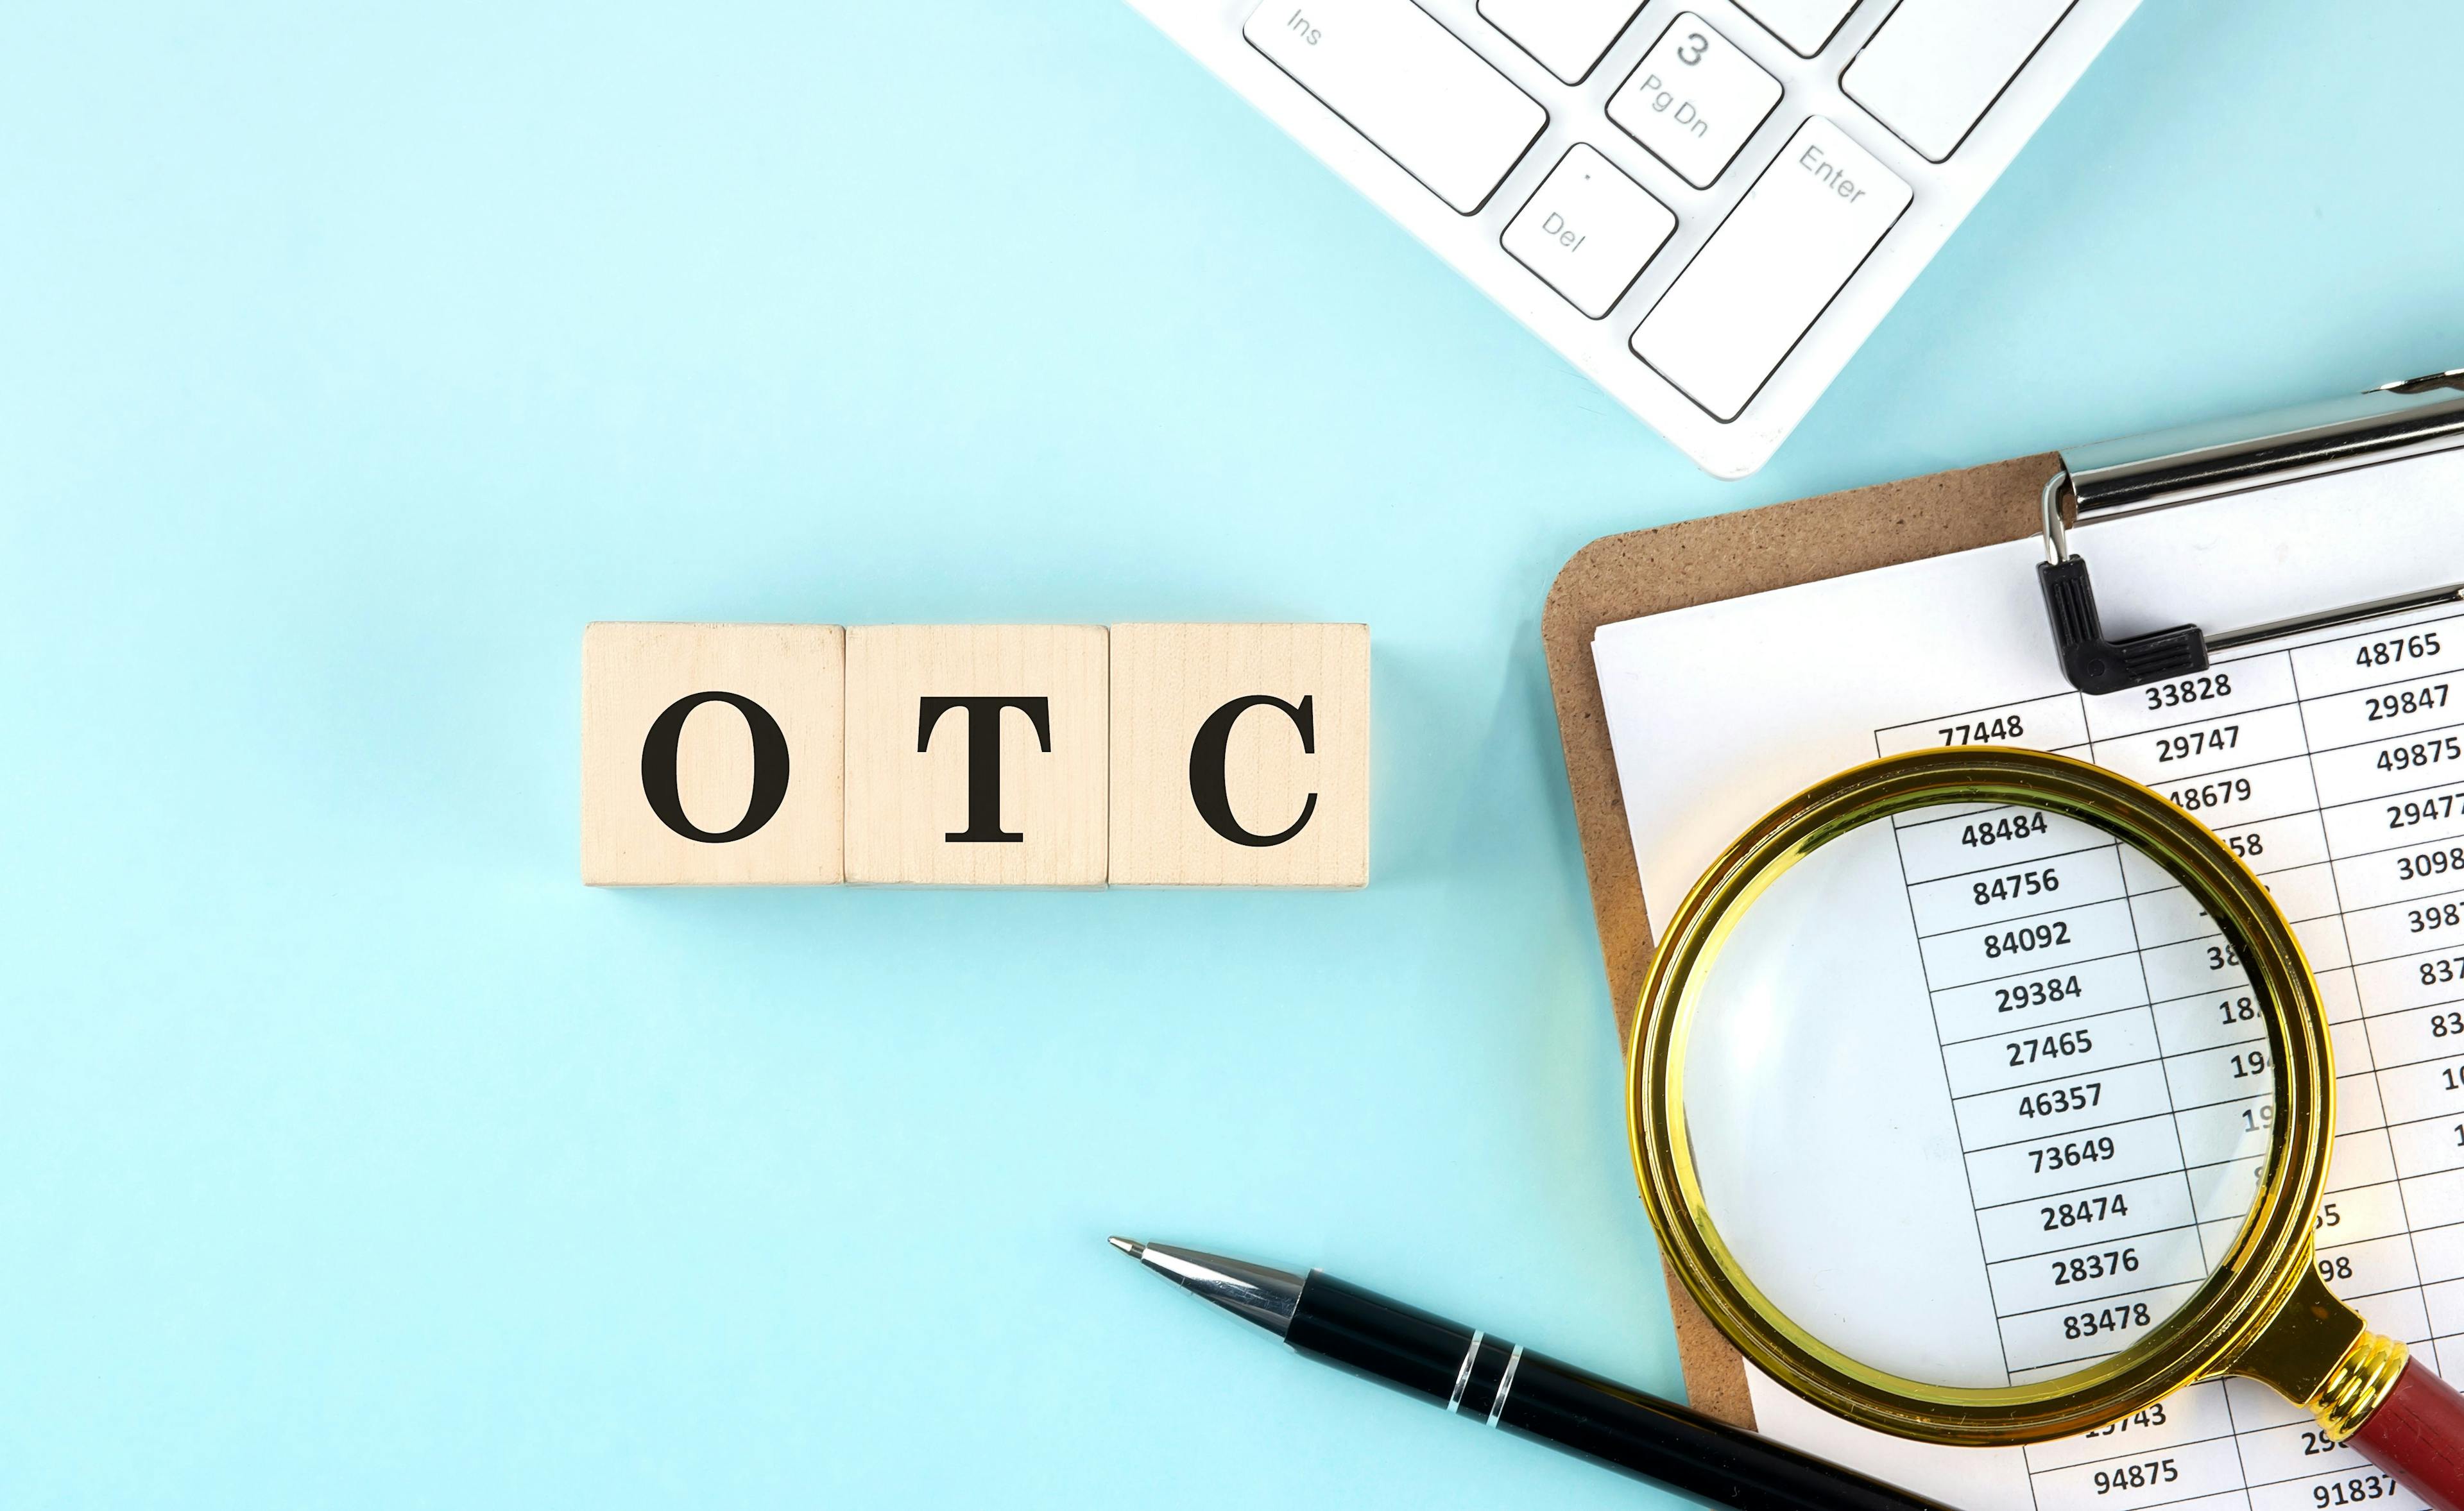 OTC products saved billions of dollars in indirect costs due to fewer visits to health care provider offices. | Image credit: Iryna - stock.adobe.com